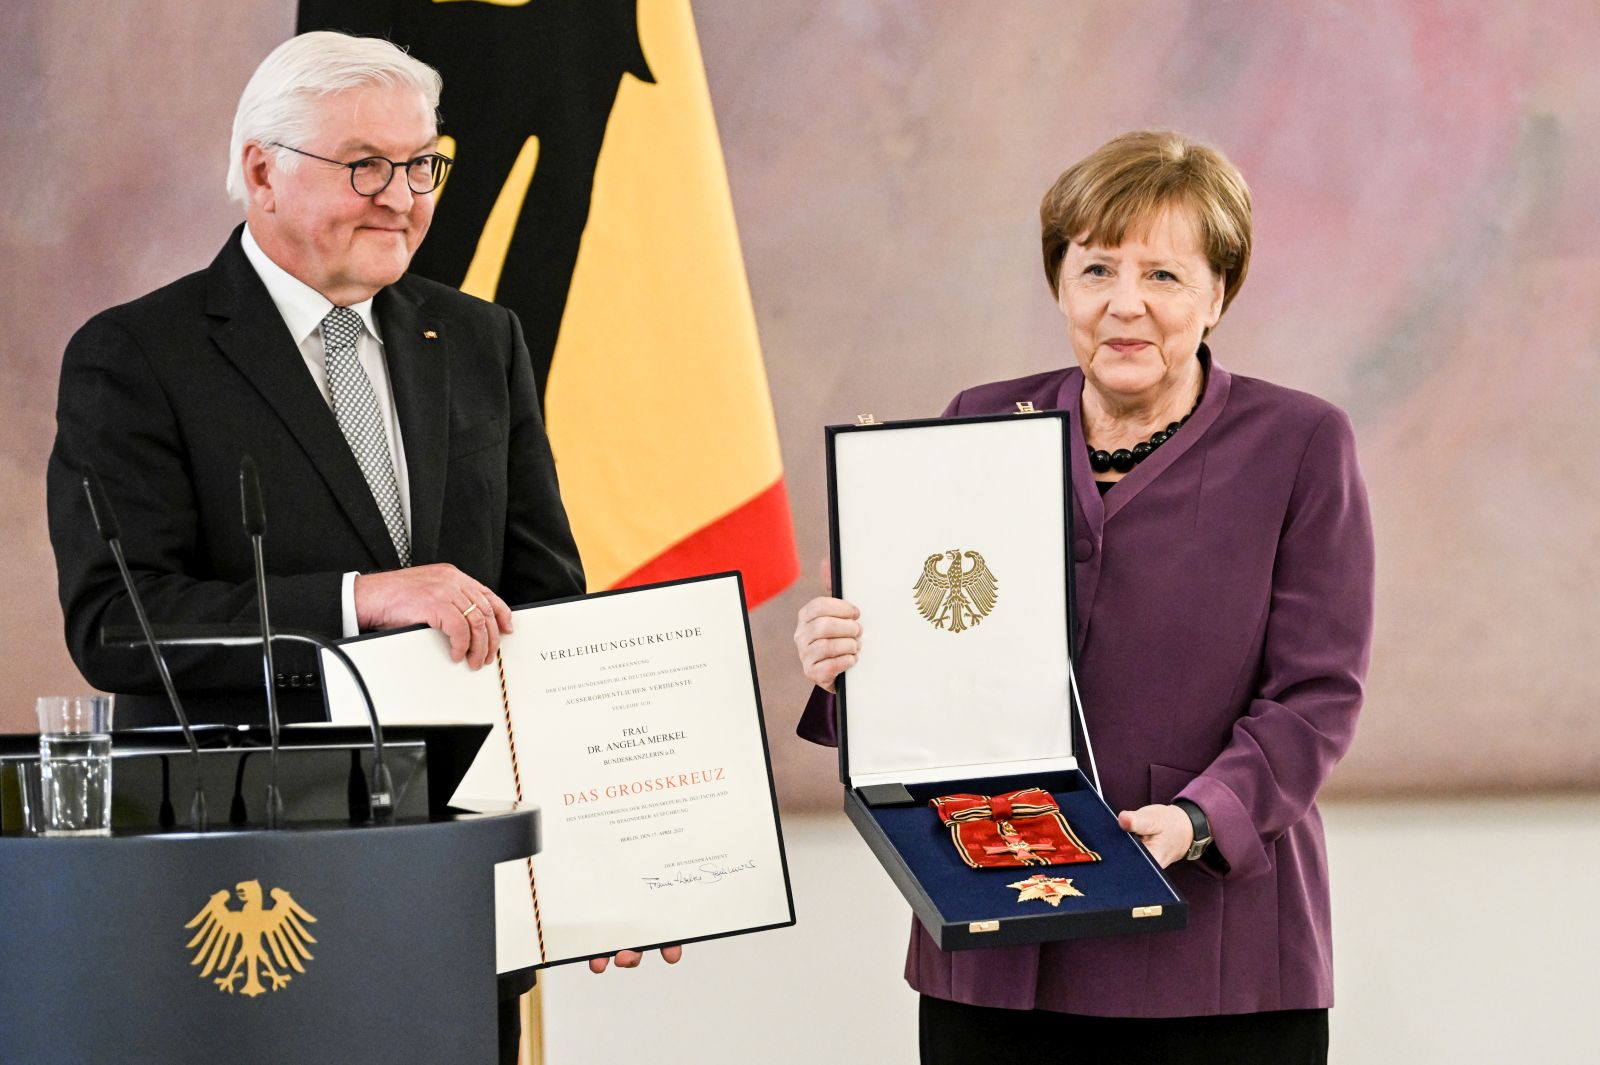 epa10577208 Former German Chancellor Angela Merkel (R) poses with the box after she was awarded the 'Grand Cross of the Order of Merit of the Federal Republic of Germany' by German President Frank-Walter Steinmeier (L) during a ceremony in Berlin, Germany, 17 April 2023.  EPA/FILIP SINGER